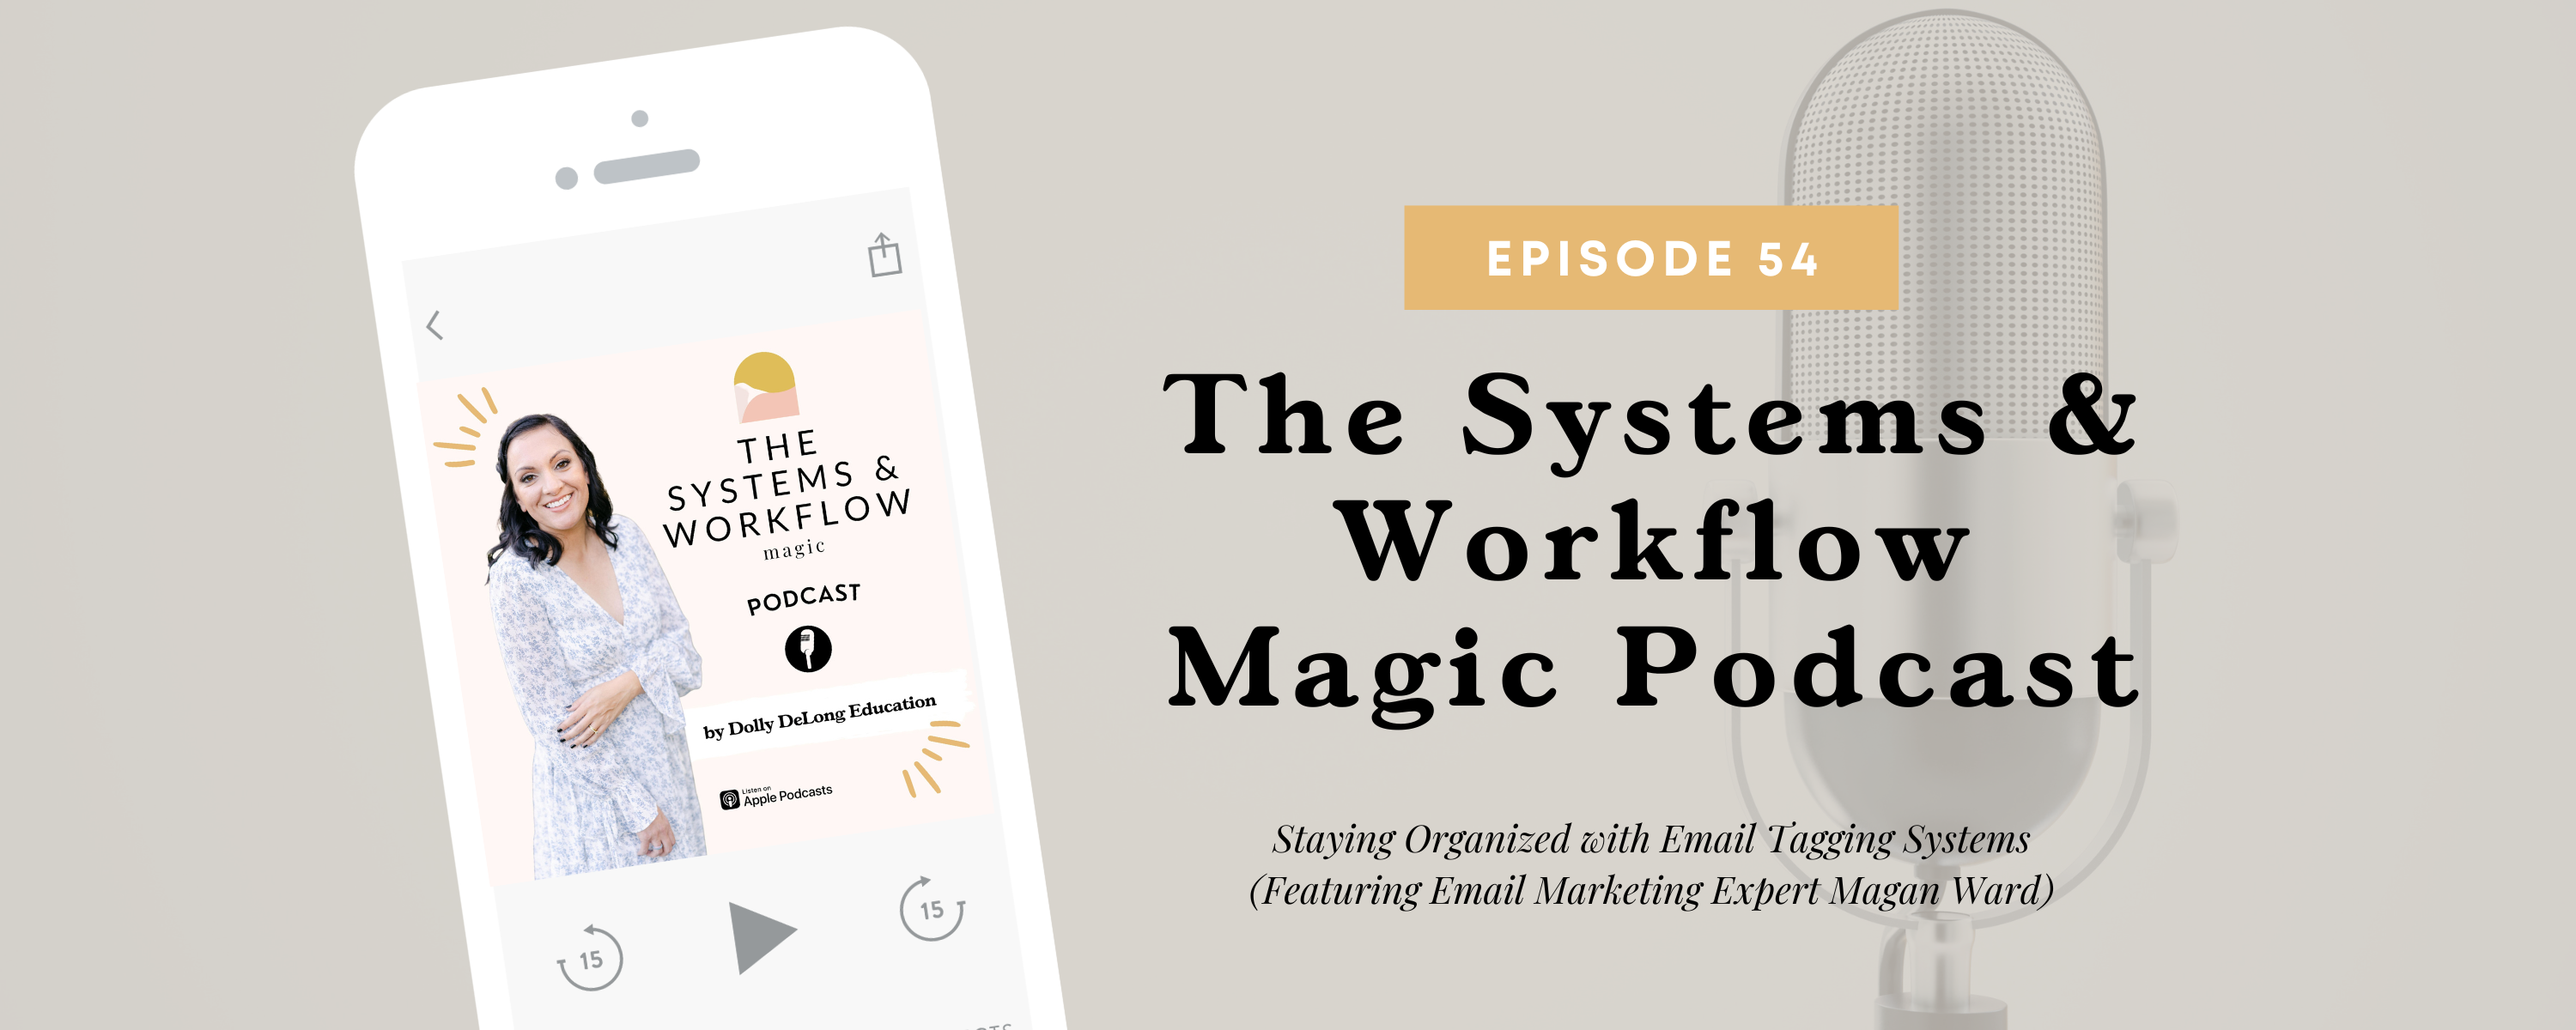 staying-organized-with-email-tagging-systems-with-magan-ward